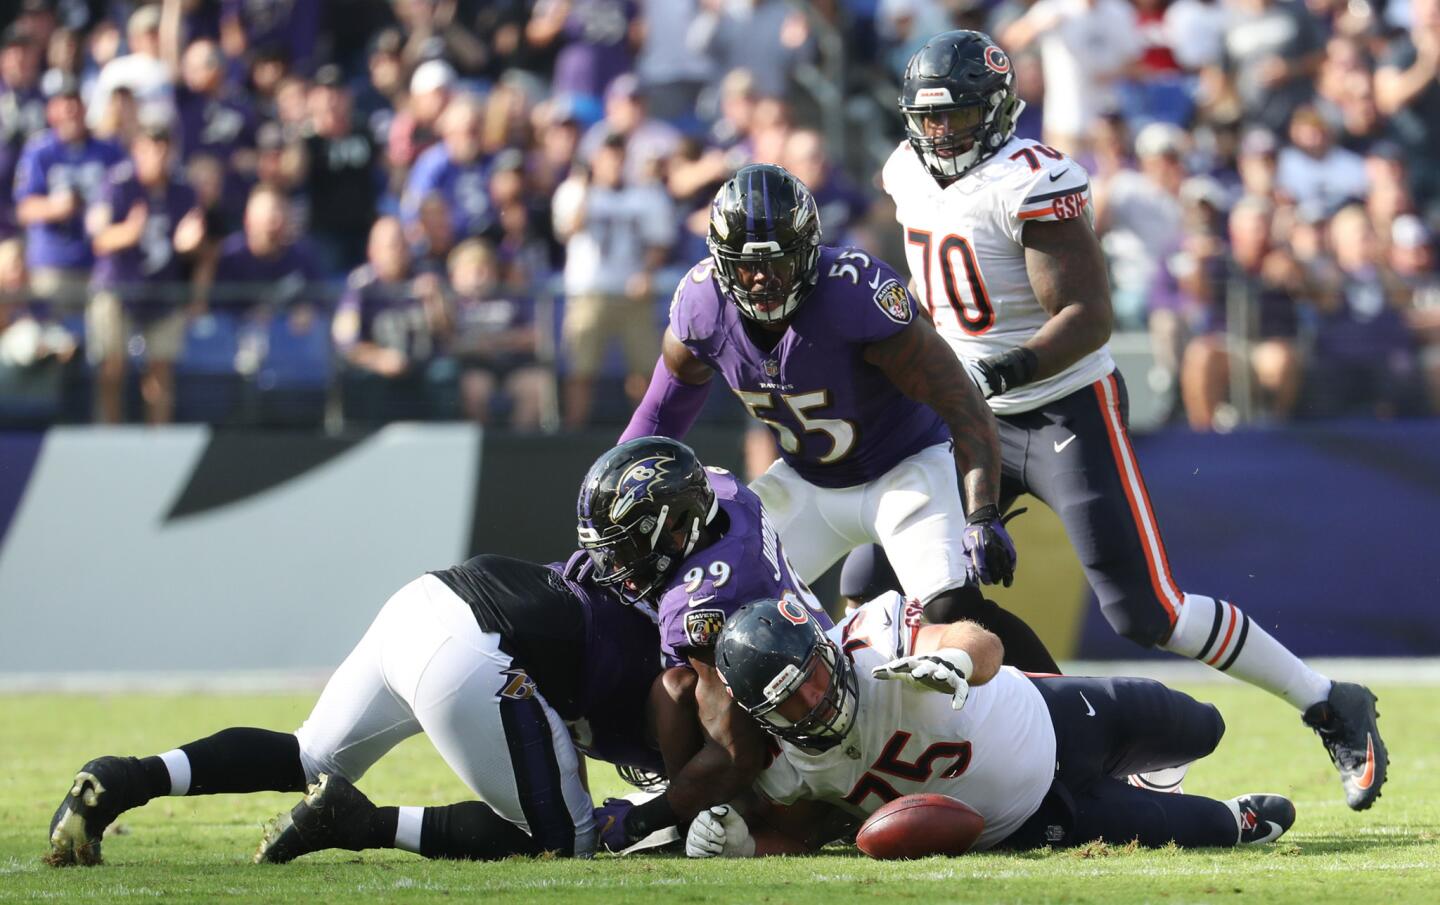 Chicago Bears offensive guard Kyle Long (75) can't recover a fumble by Mitch Trubisky in the fourth quarter on Oct. 15, 2017 at M&T Bank Stadium in Baltimore. The Bears defeated the Ravens, 27-24 in overtime.